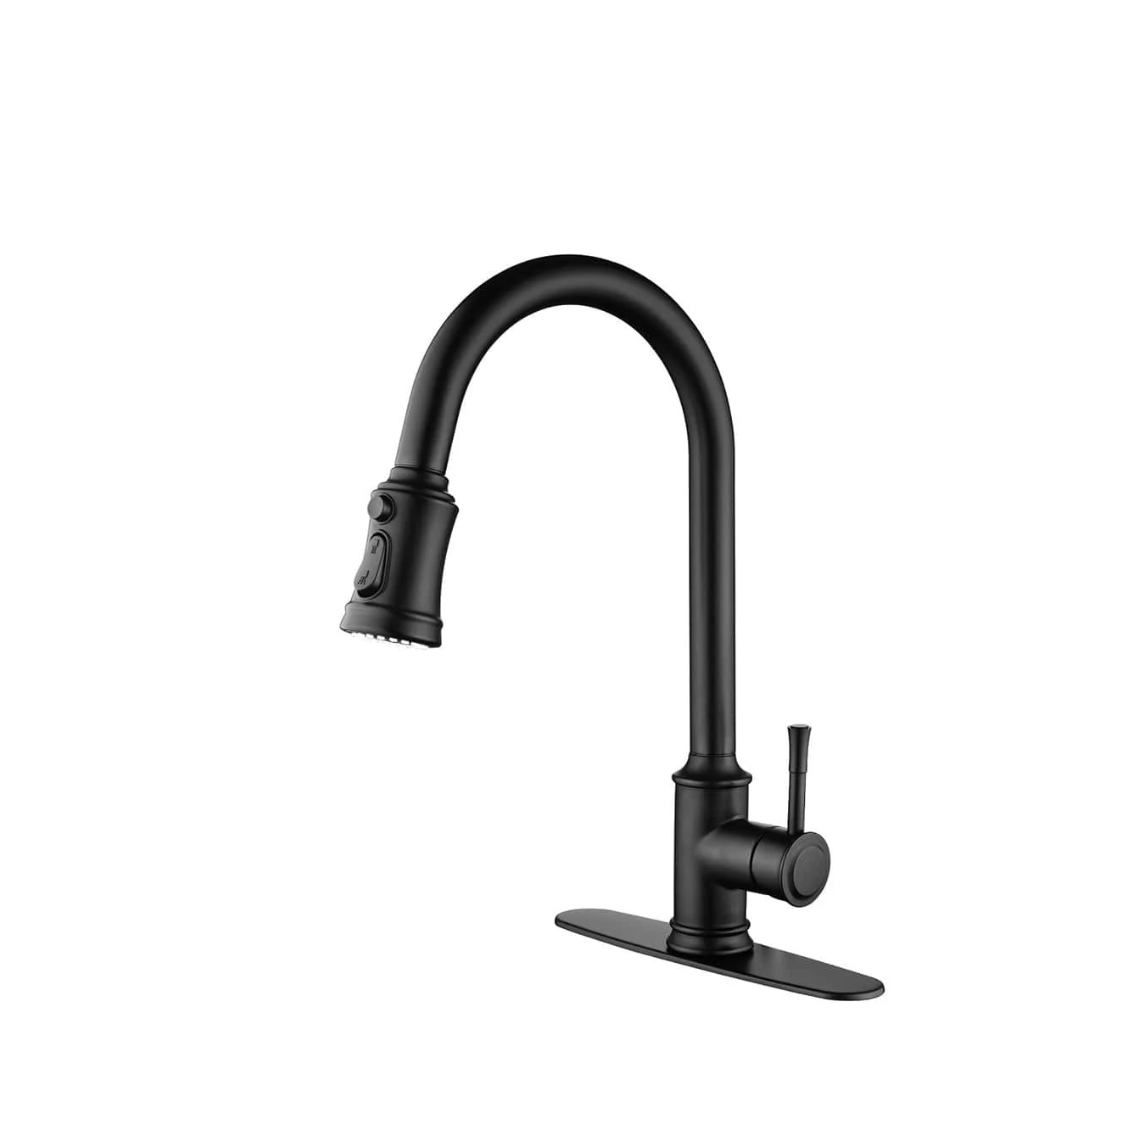 Modern Elegance Meets Smart Convenience: OSQI Touch Kitchen Faucet with Pull Down Sprayer